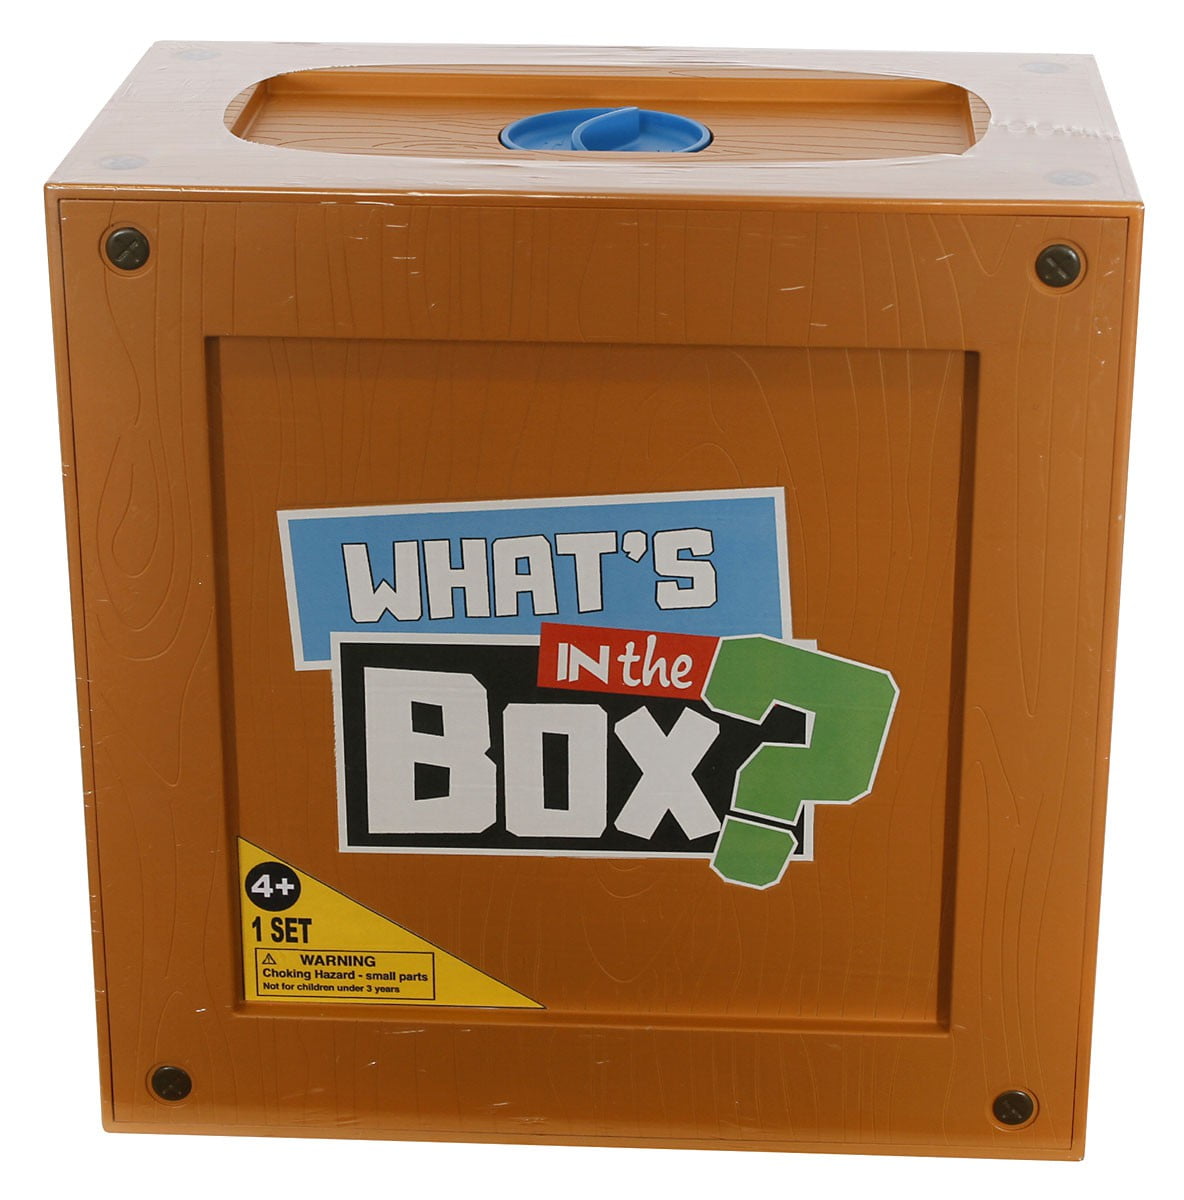 What The Box?